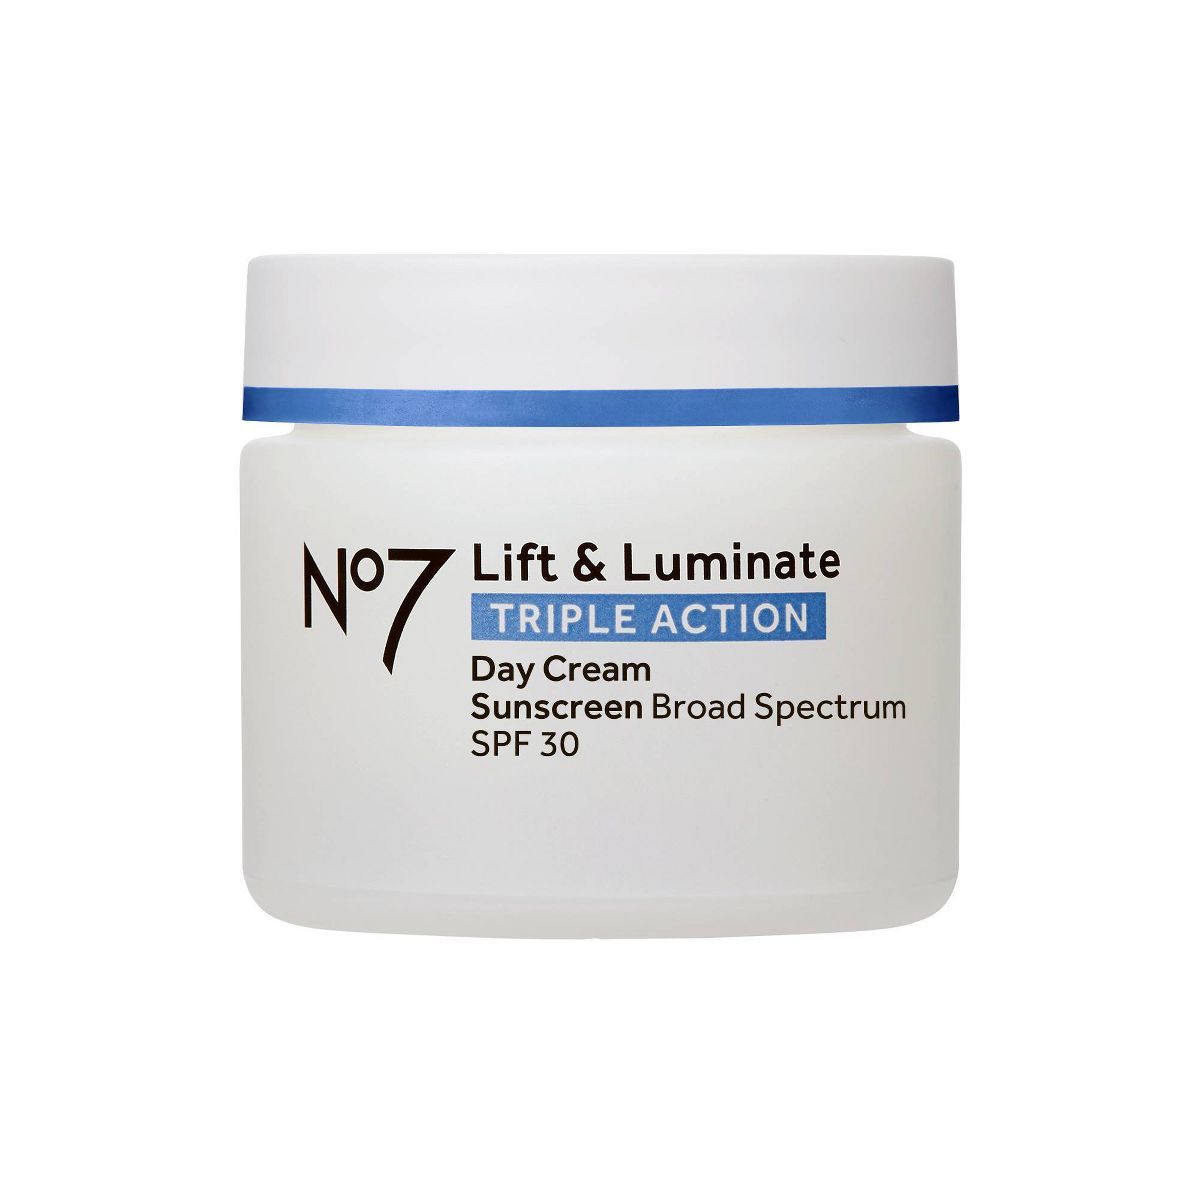 No7 Lift & Luminate Triple Action Day Cream with SPF 30 - 1.69 fl oz | Target